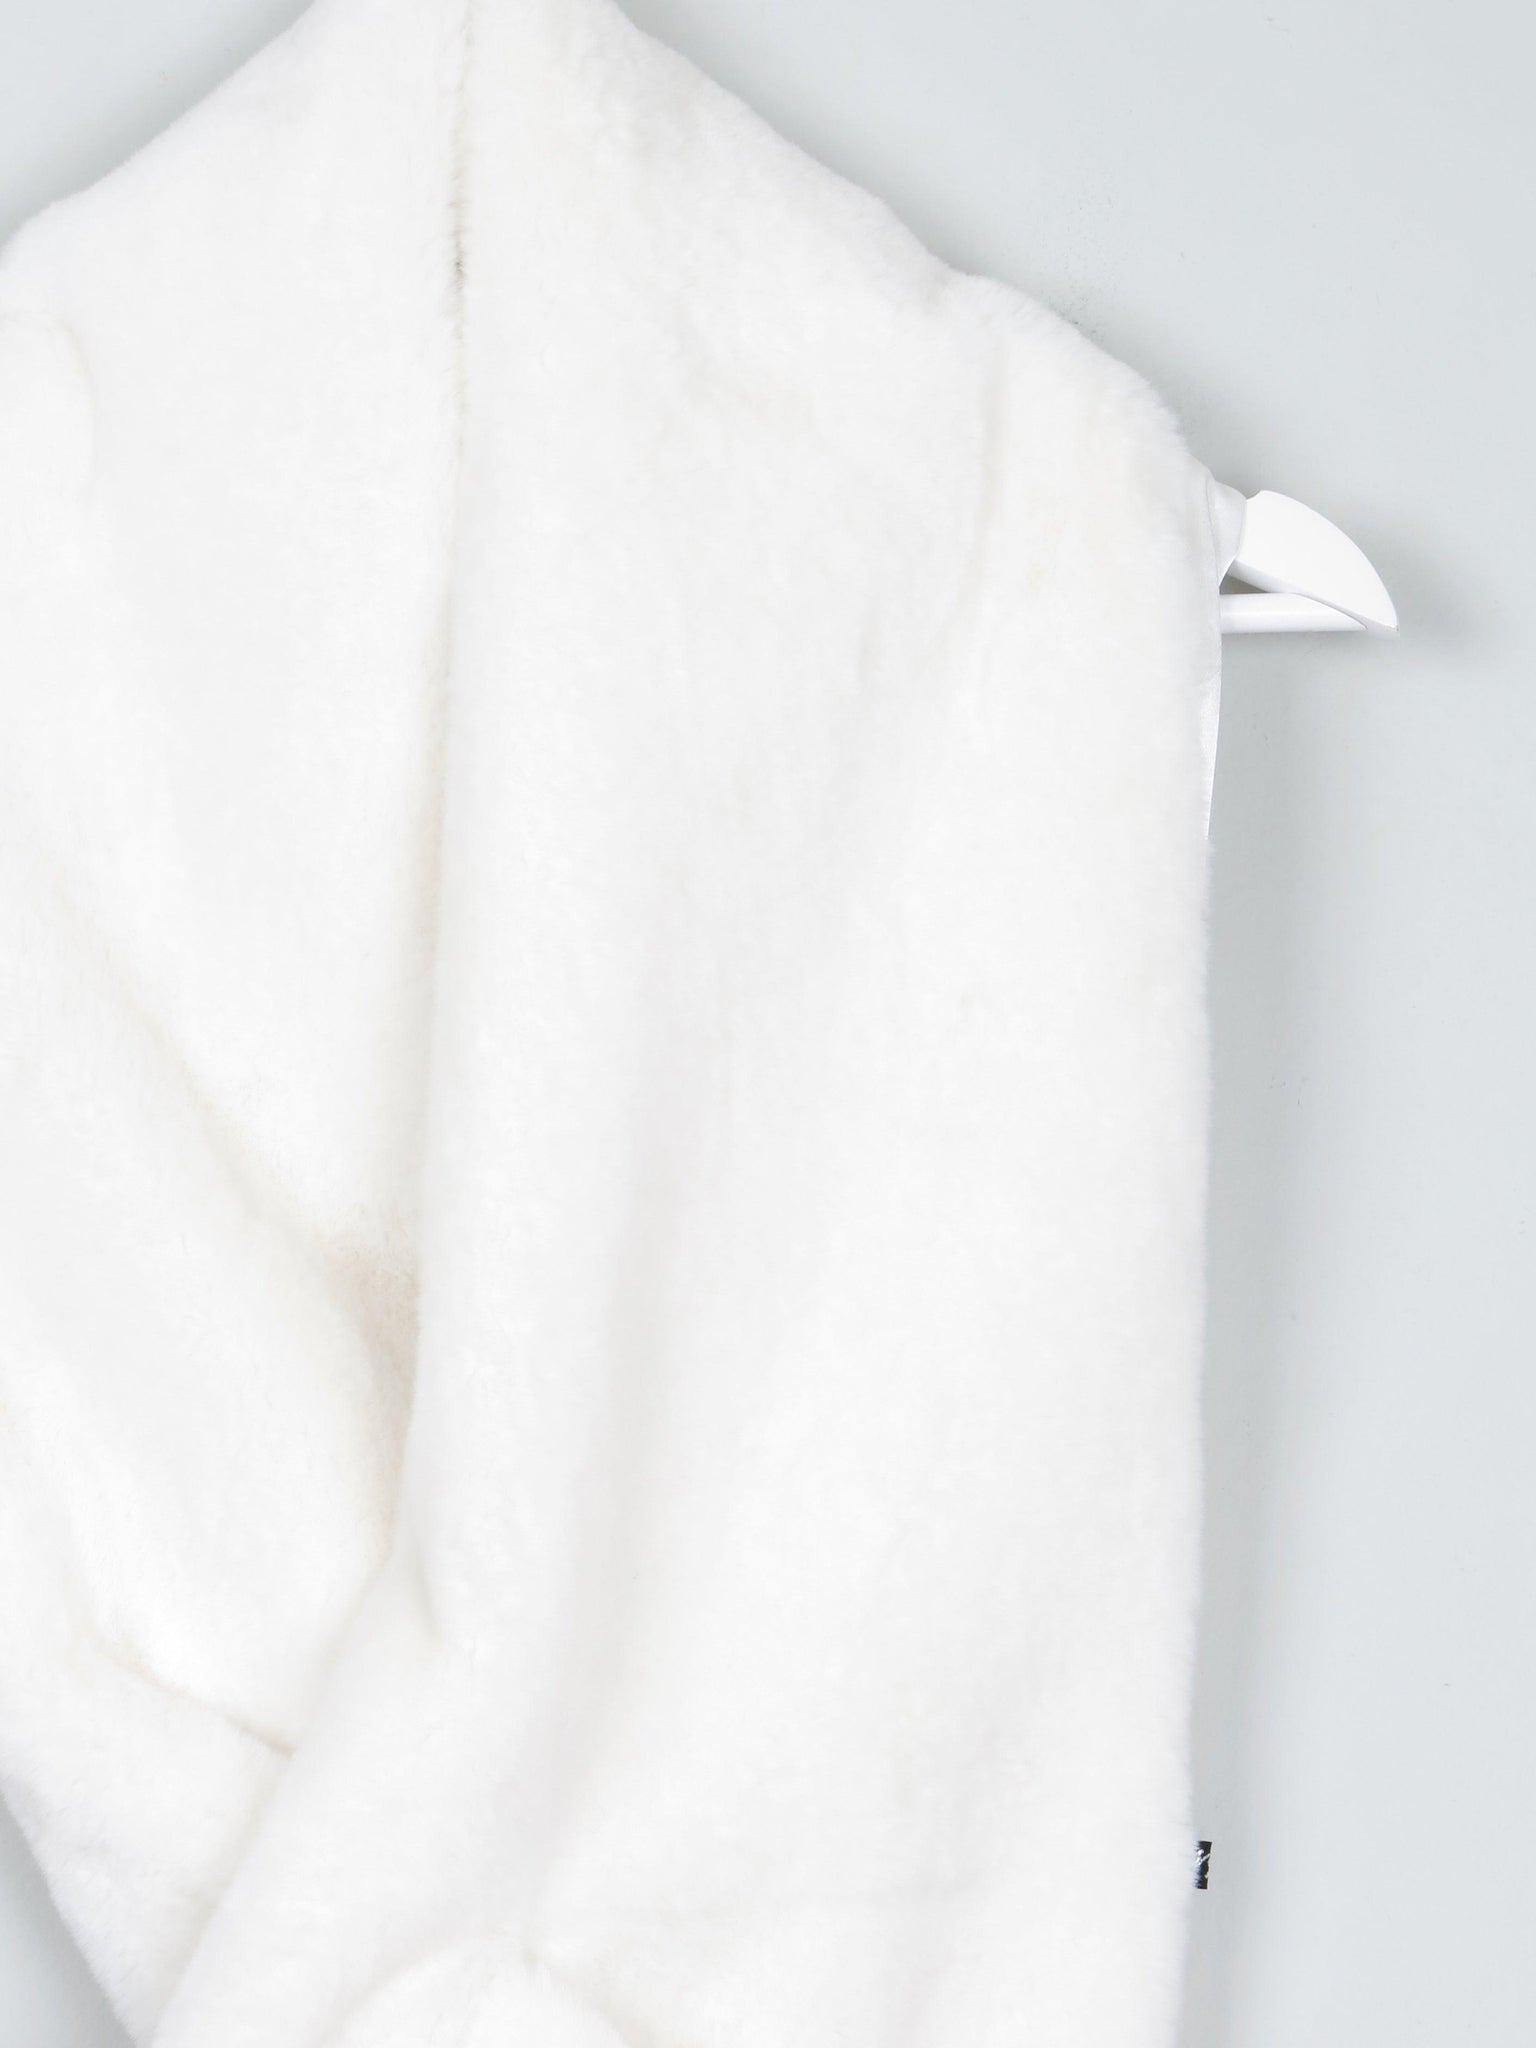 New Ivory Soft Faux Fur Wrap/Scarf - The Harlequin